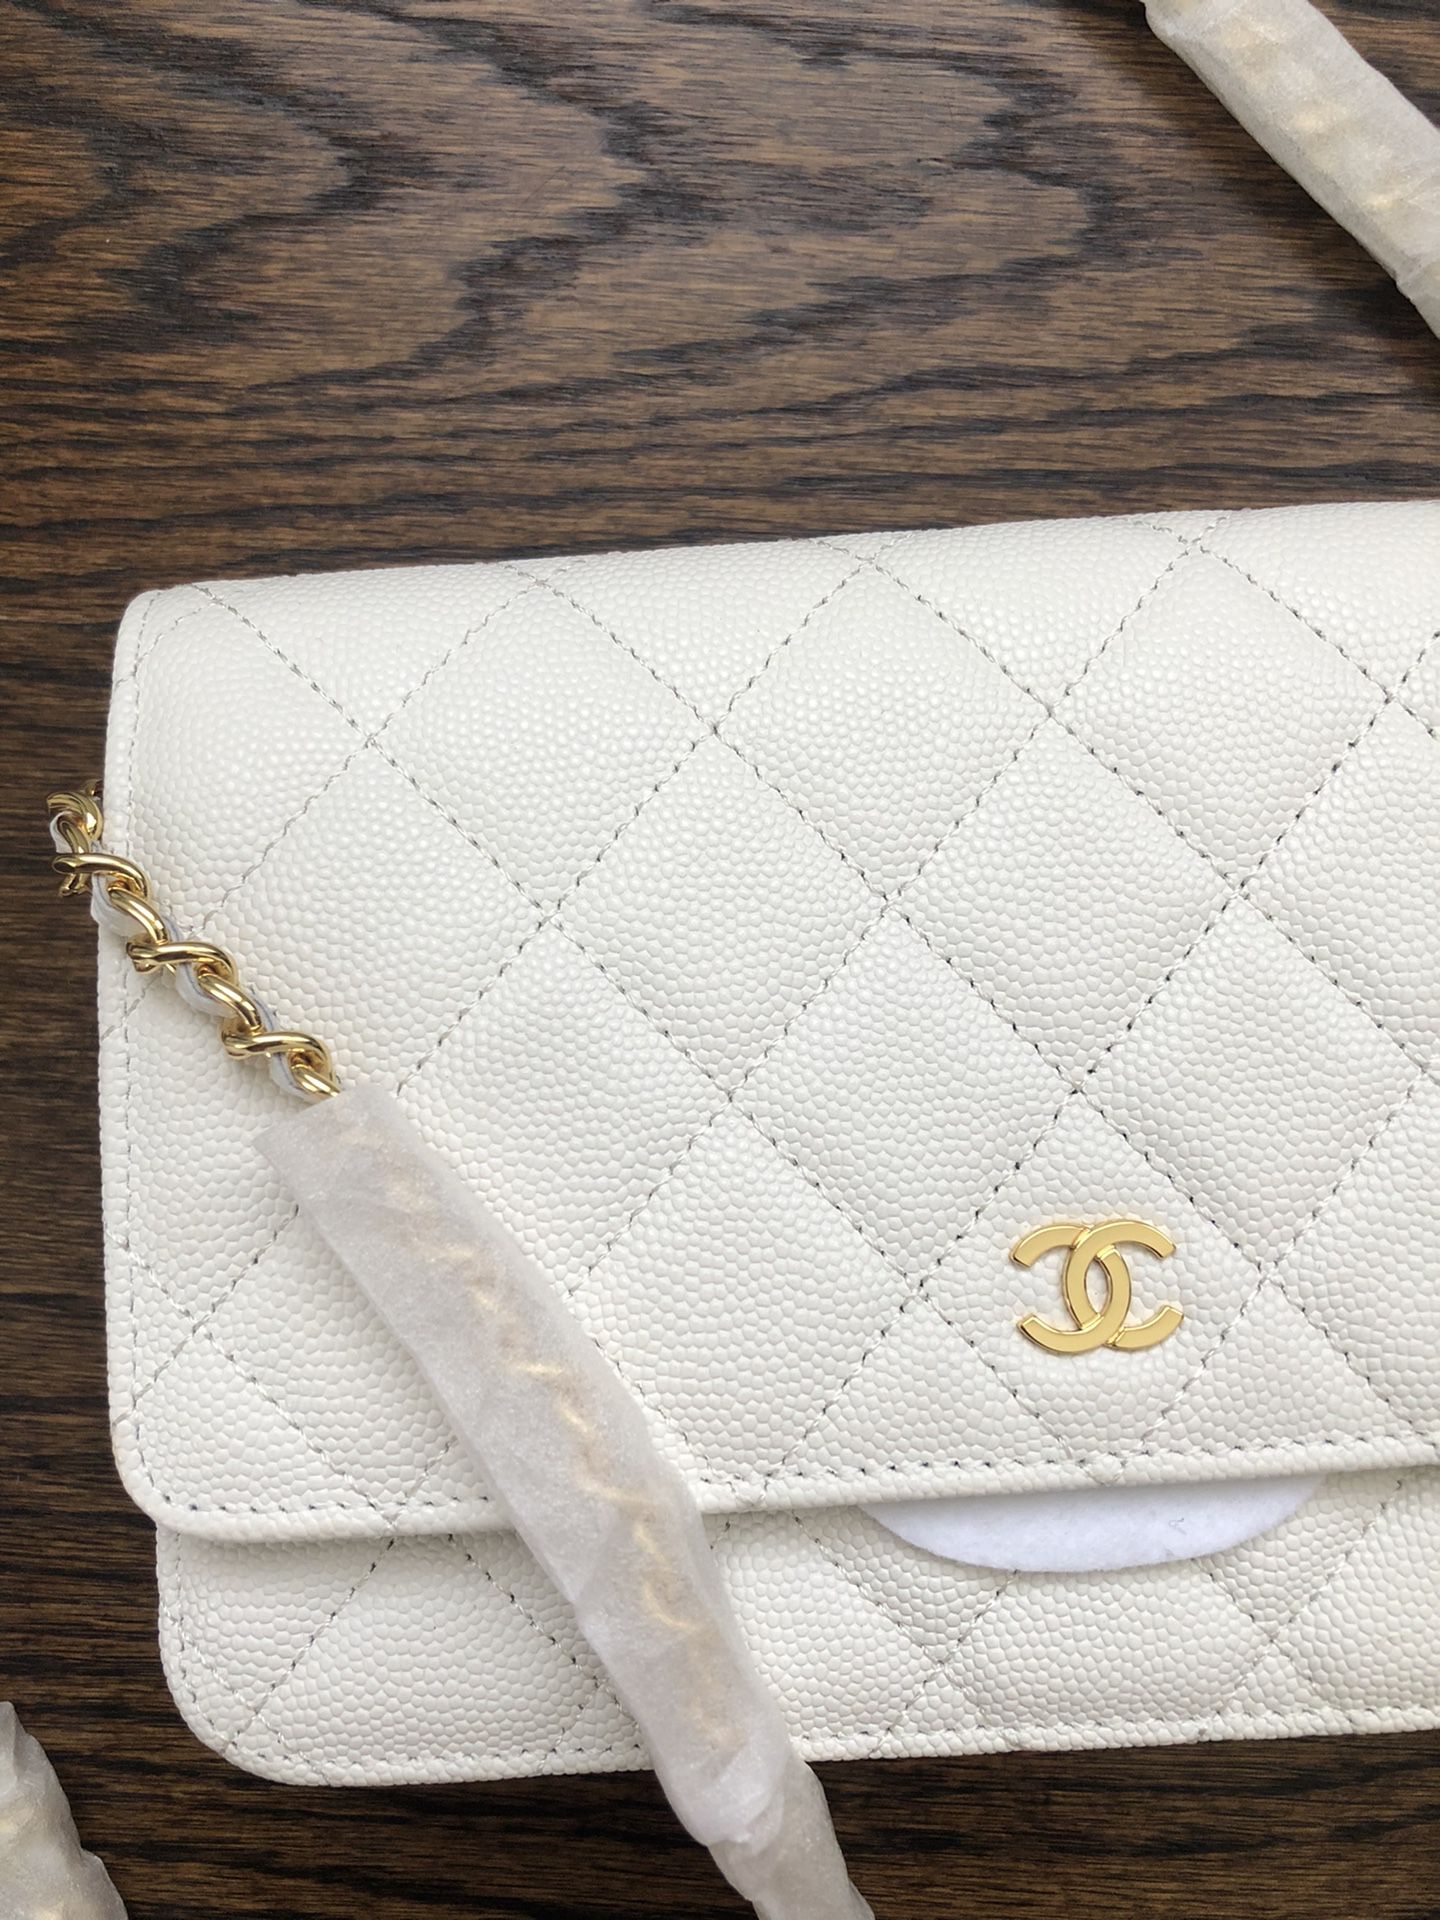 Chanel Wallet On Chain. White With Gold Hardware for Sale in